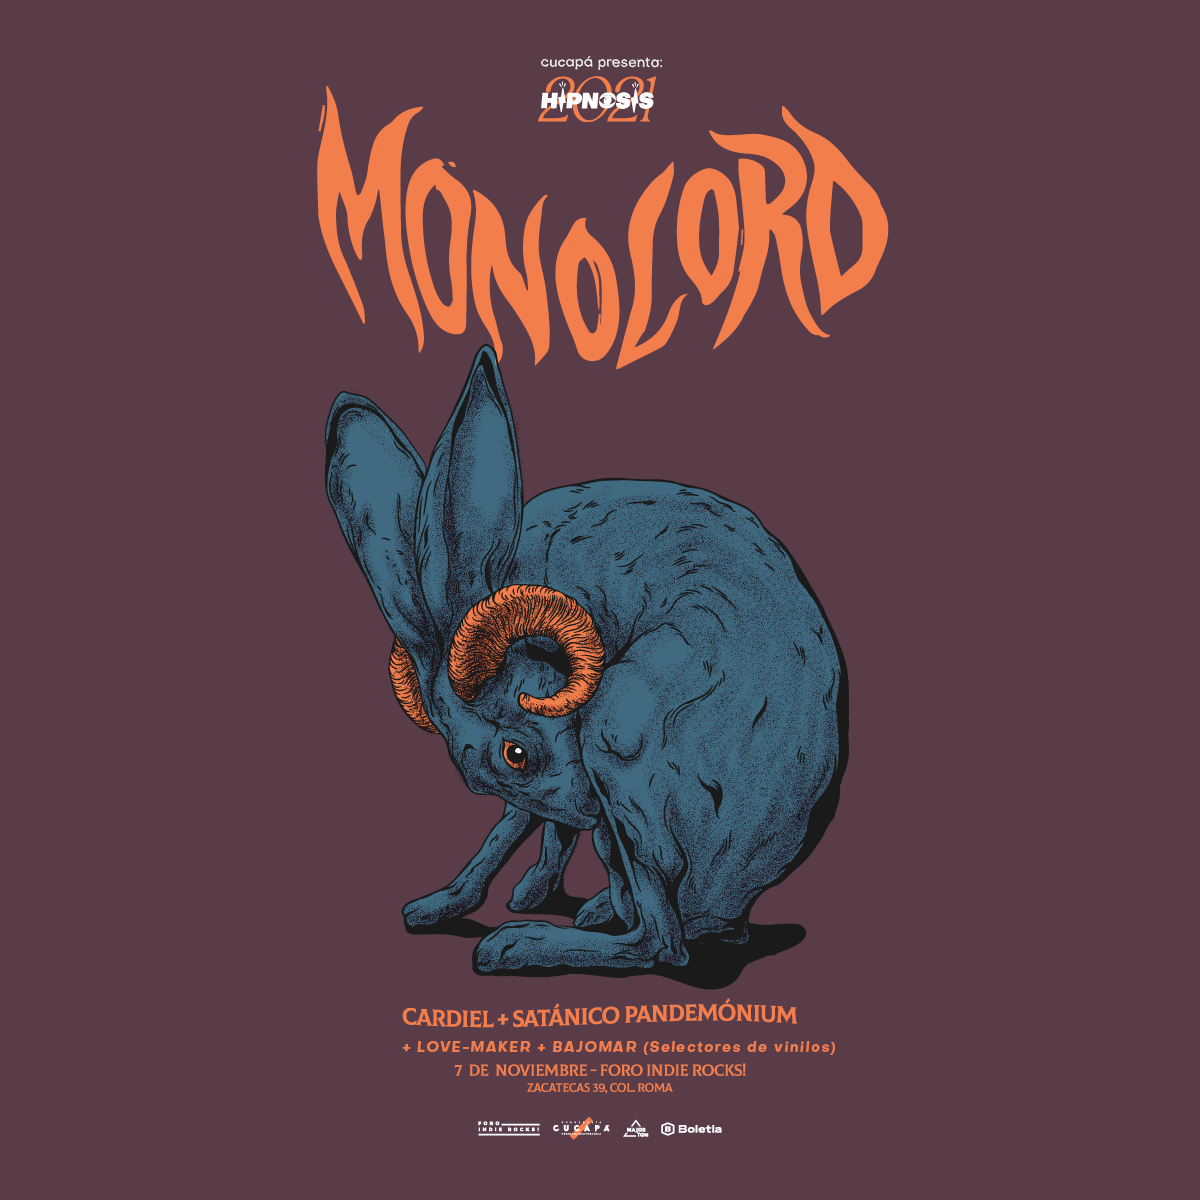 MONOLORD_CARTEL-F_IG_2